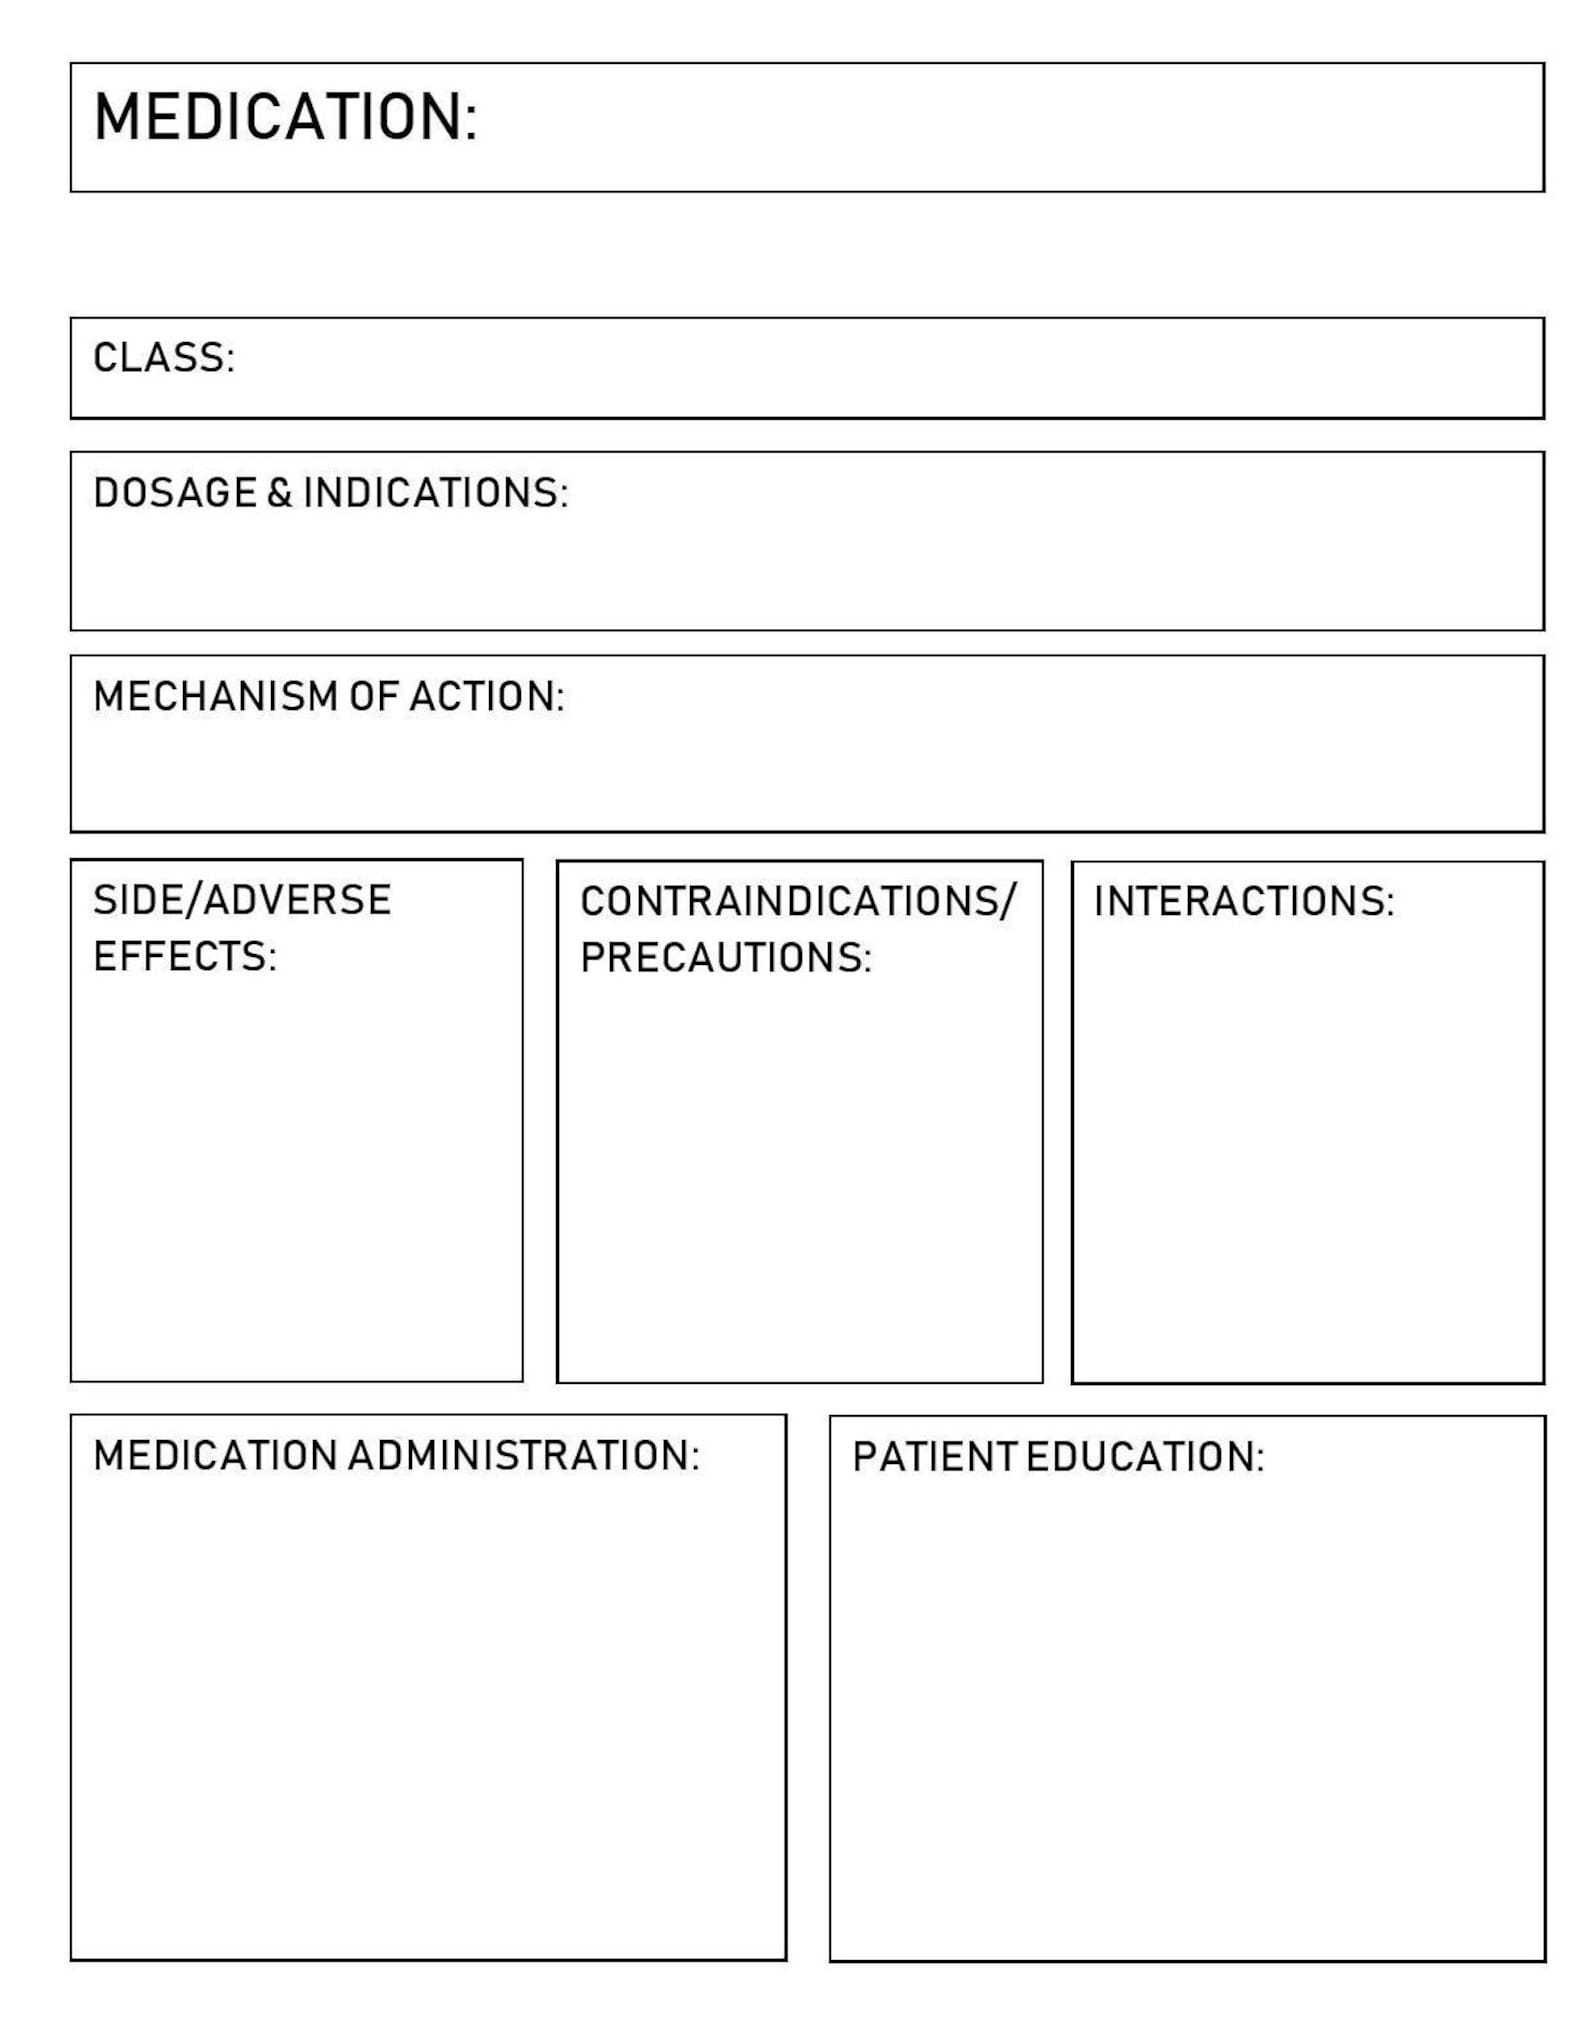 download-pdf-mcgraw-hill-s-2020-2021-top-300-pharmacy-drug-cards